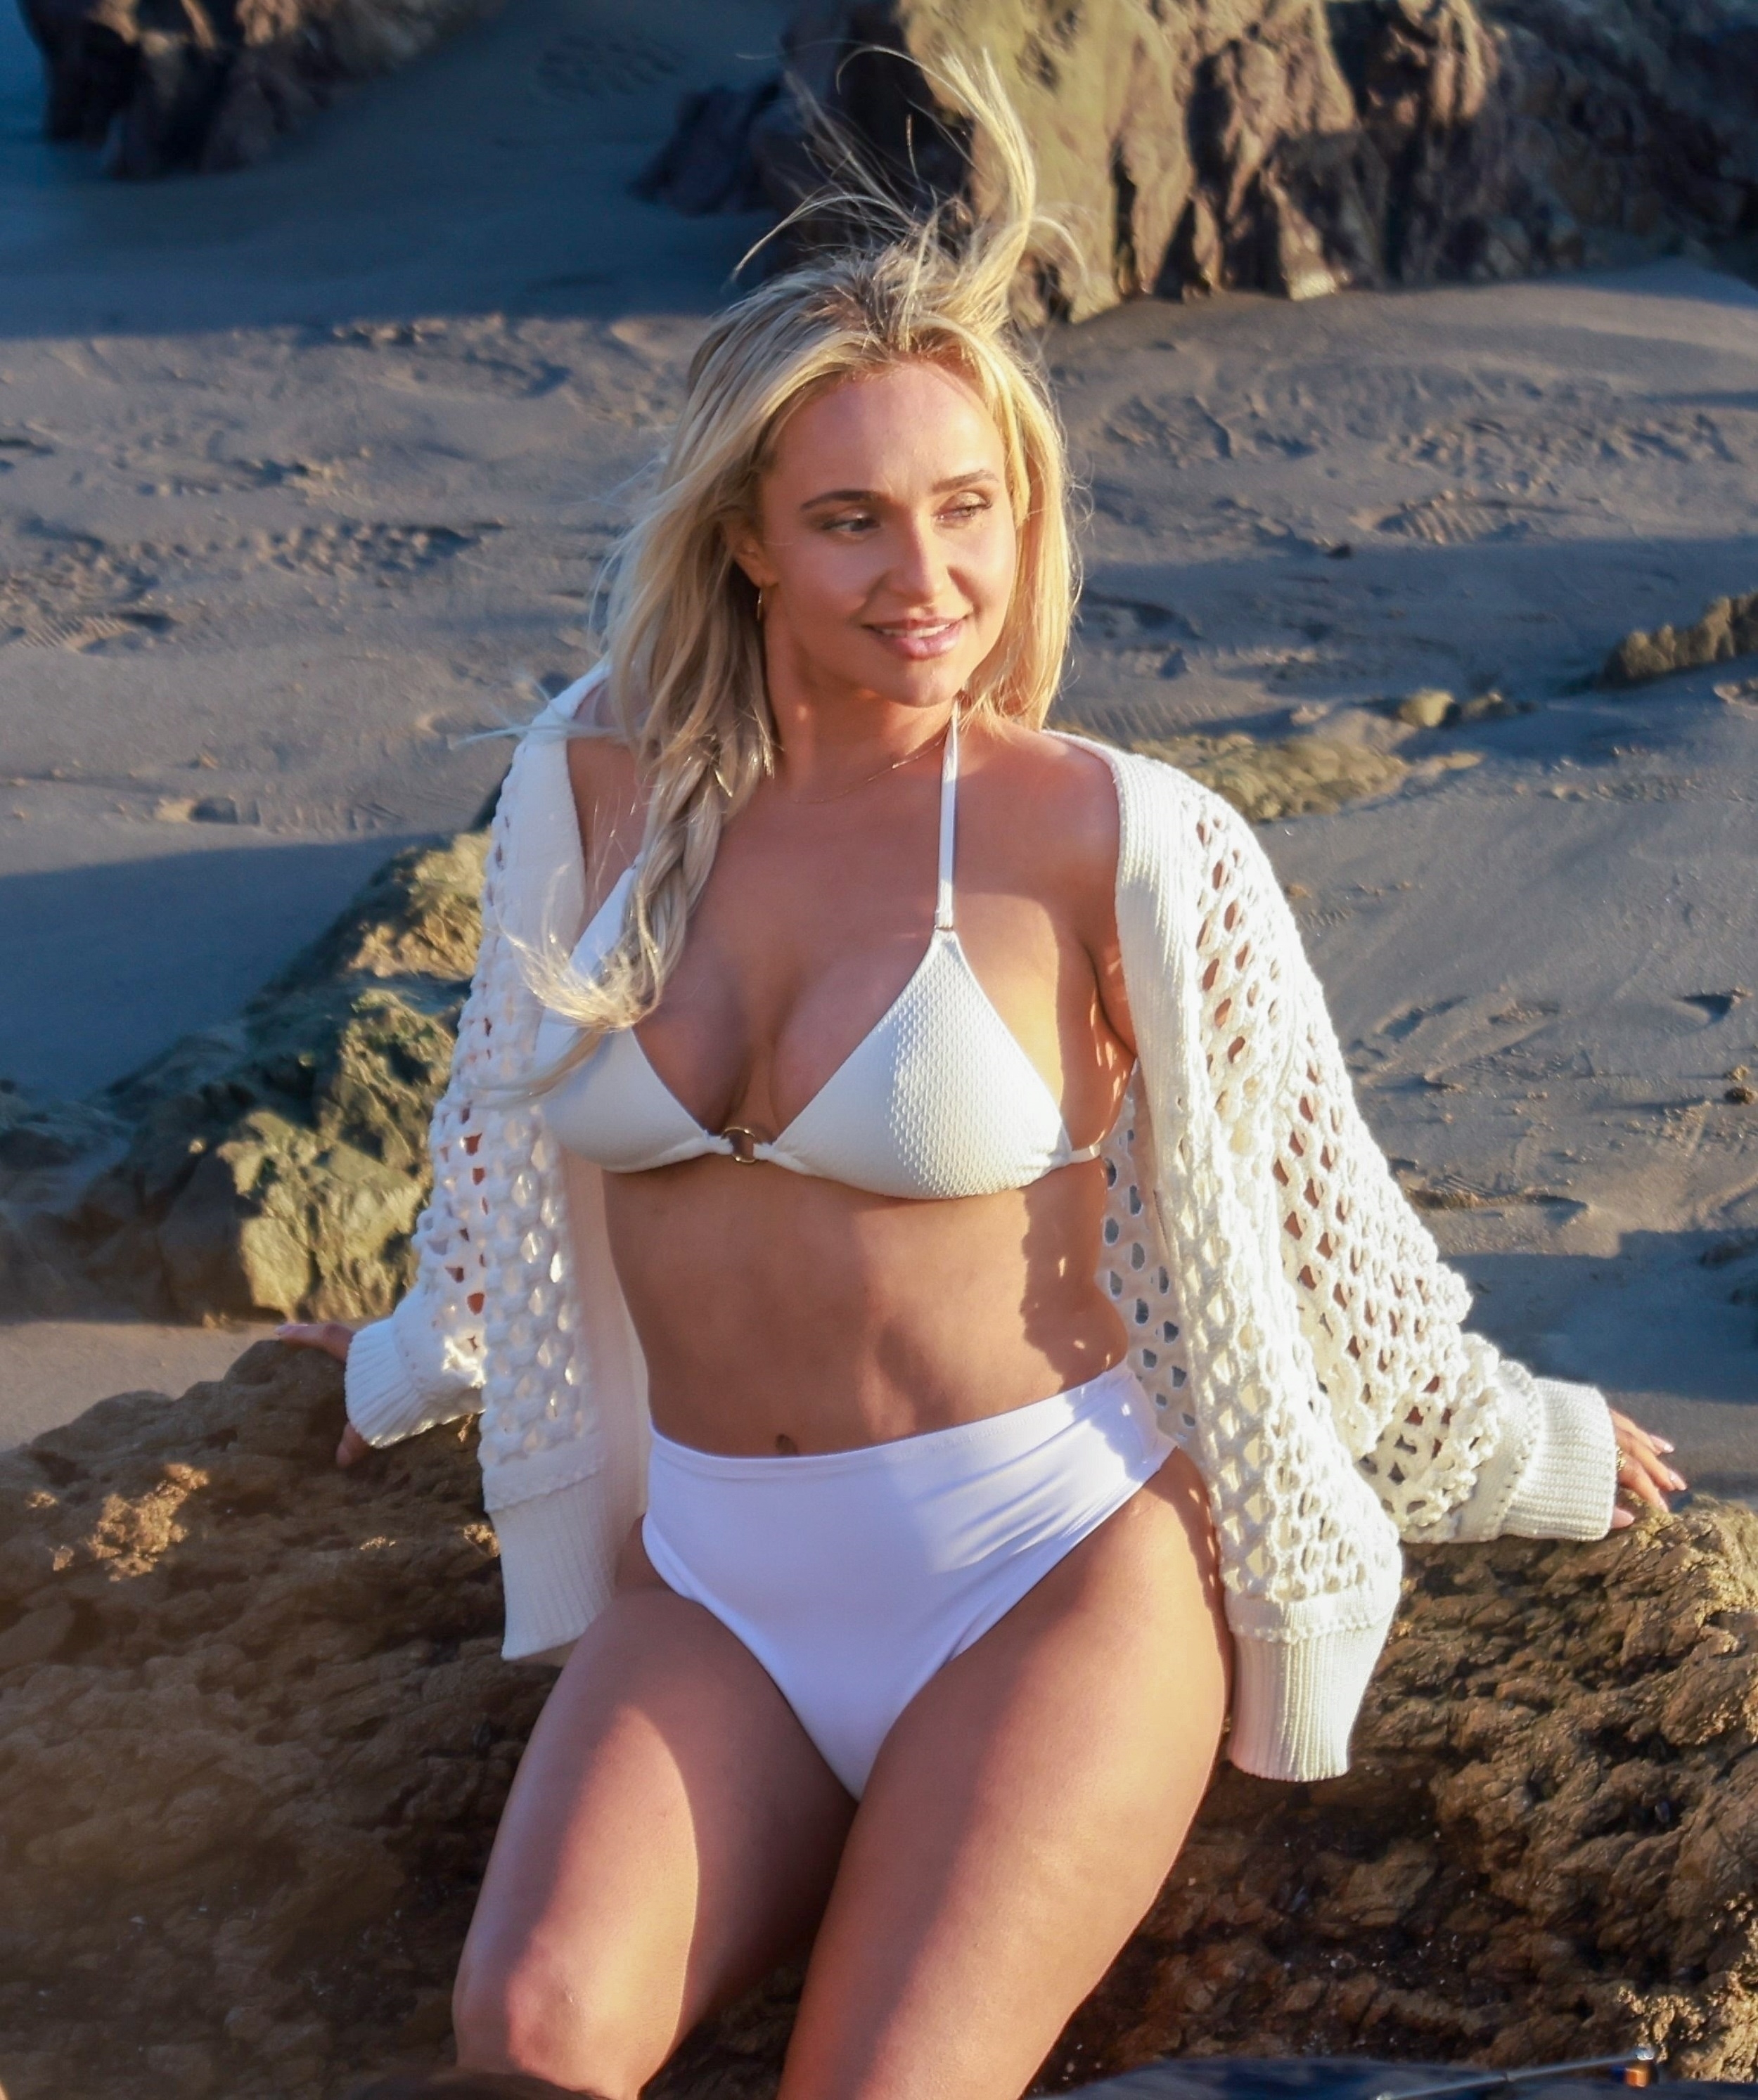 <p><a href="https://www.wonderwall.com/celebrity/profiles/overview/hayden-panettiere-291.article">Hayden Panettiere</a> posed on the beach in Malibu on Jan. 24. </p>